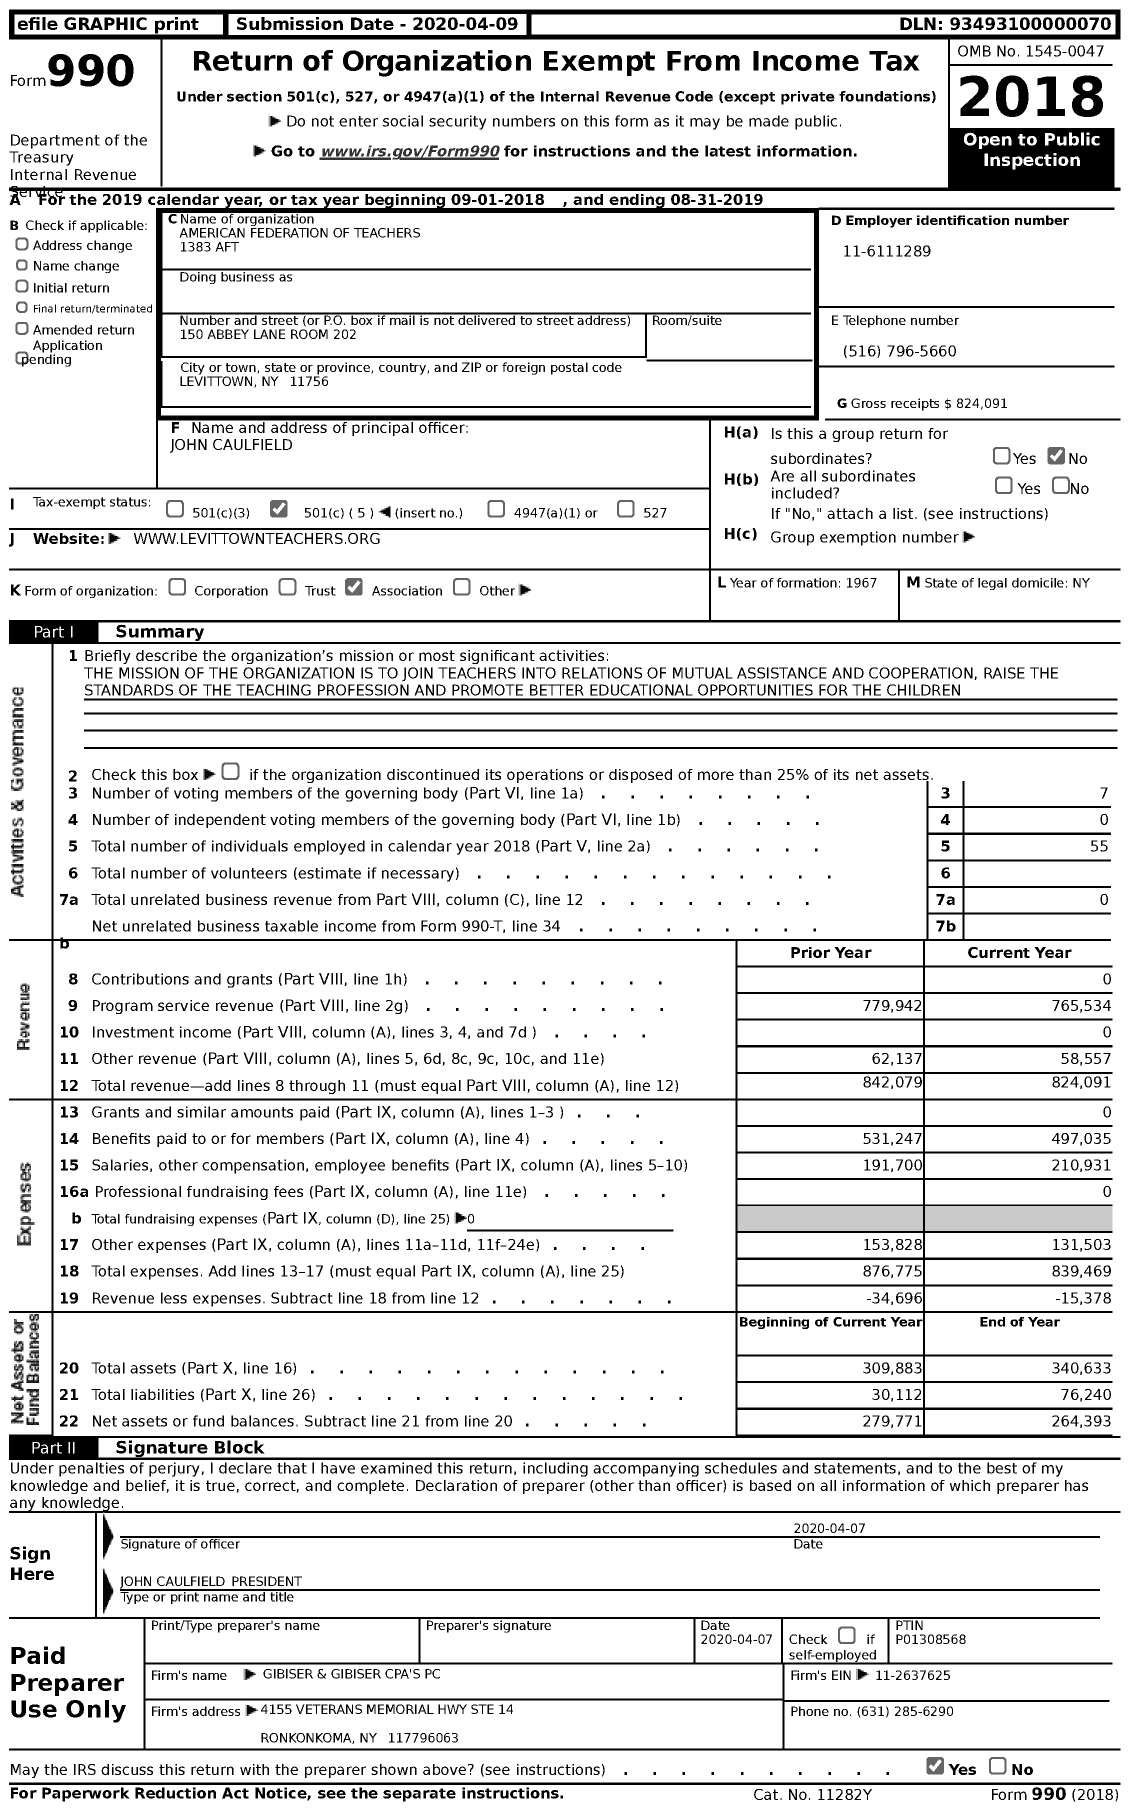 Image of first page of 2018 Form 990 for American Federation of Teachers 1383 (AFT)